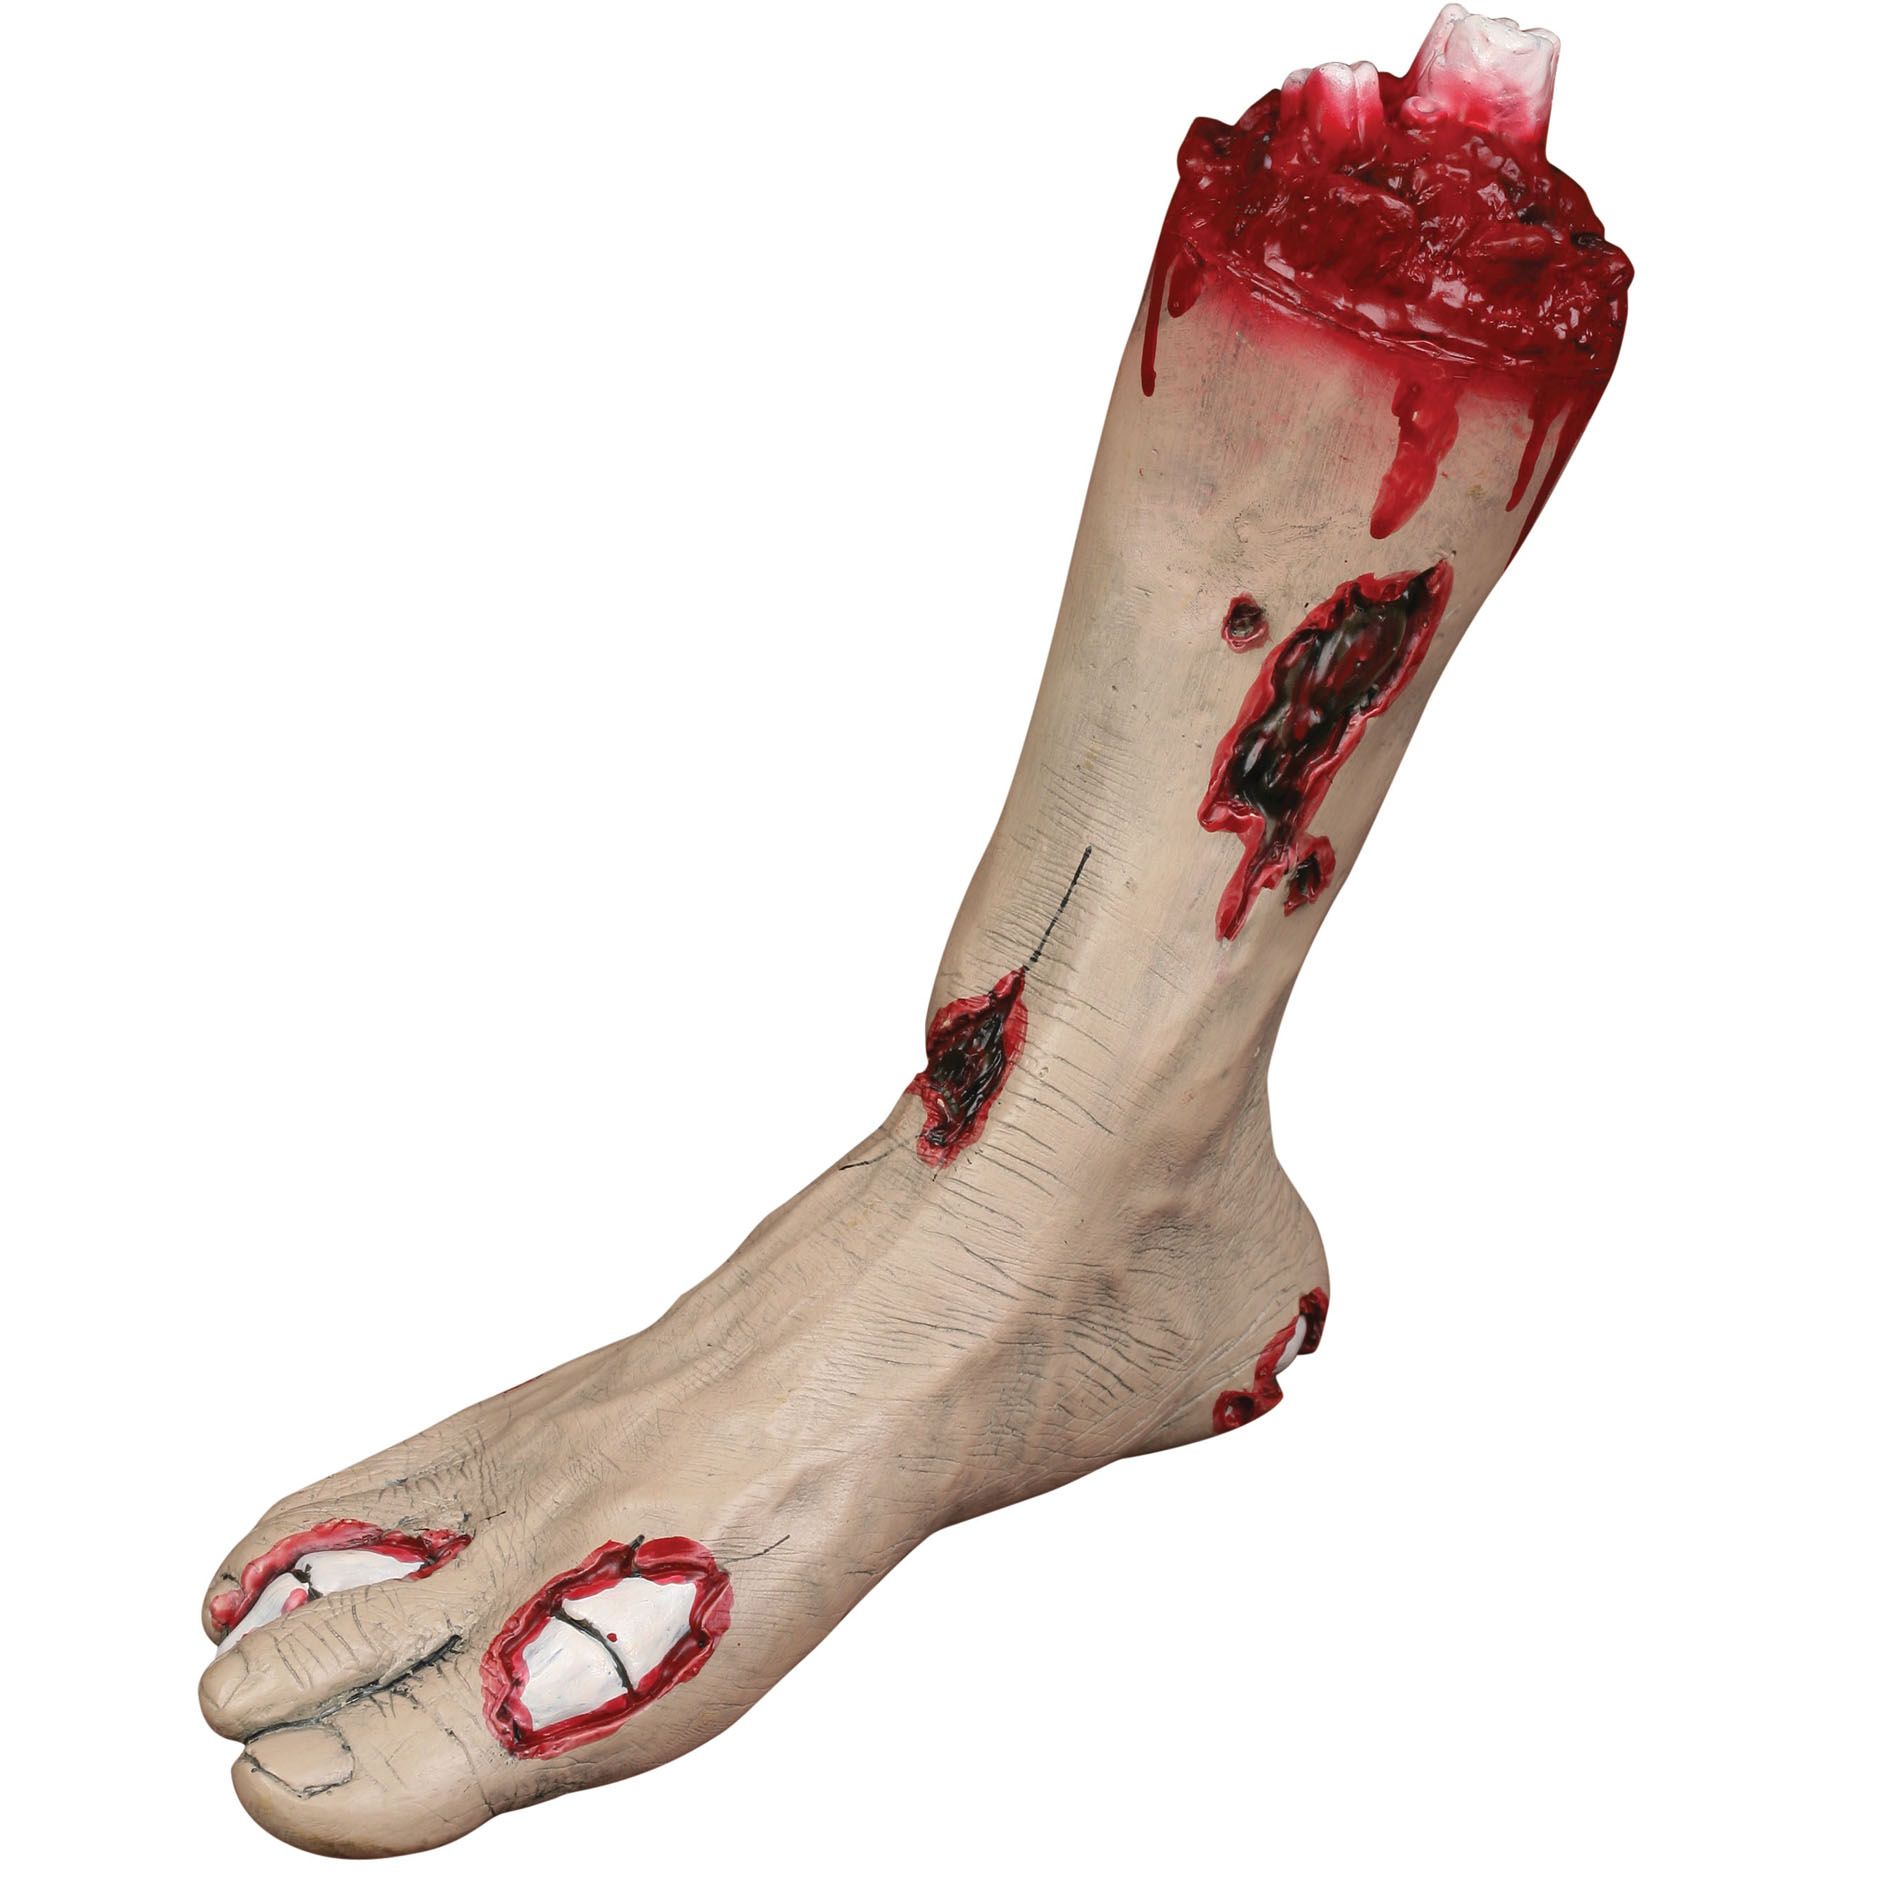 Totally Ghoul Severed Zombie Foot